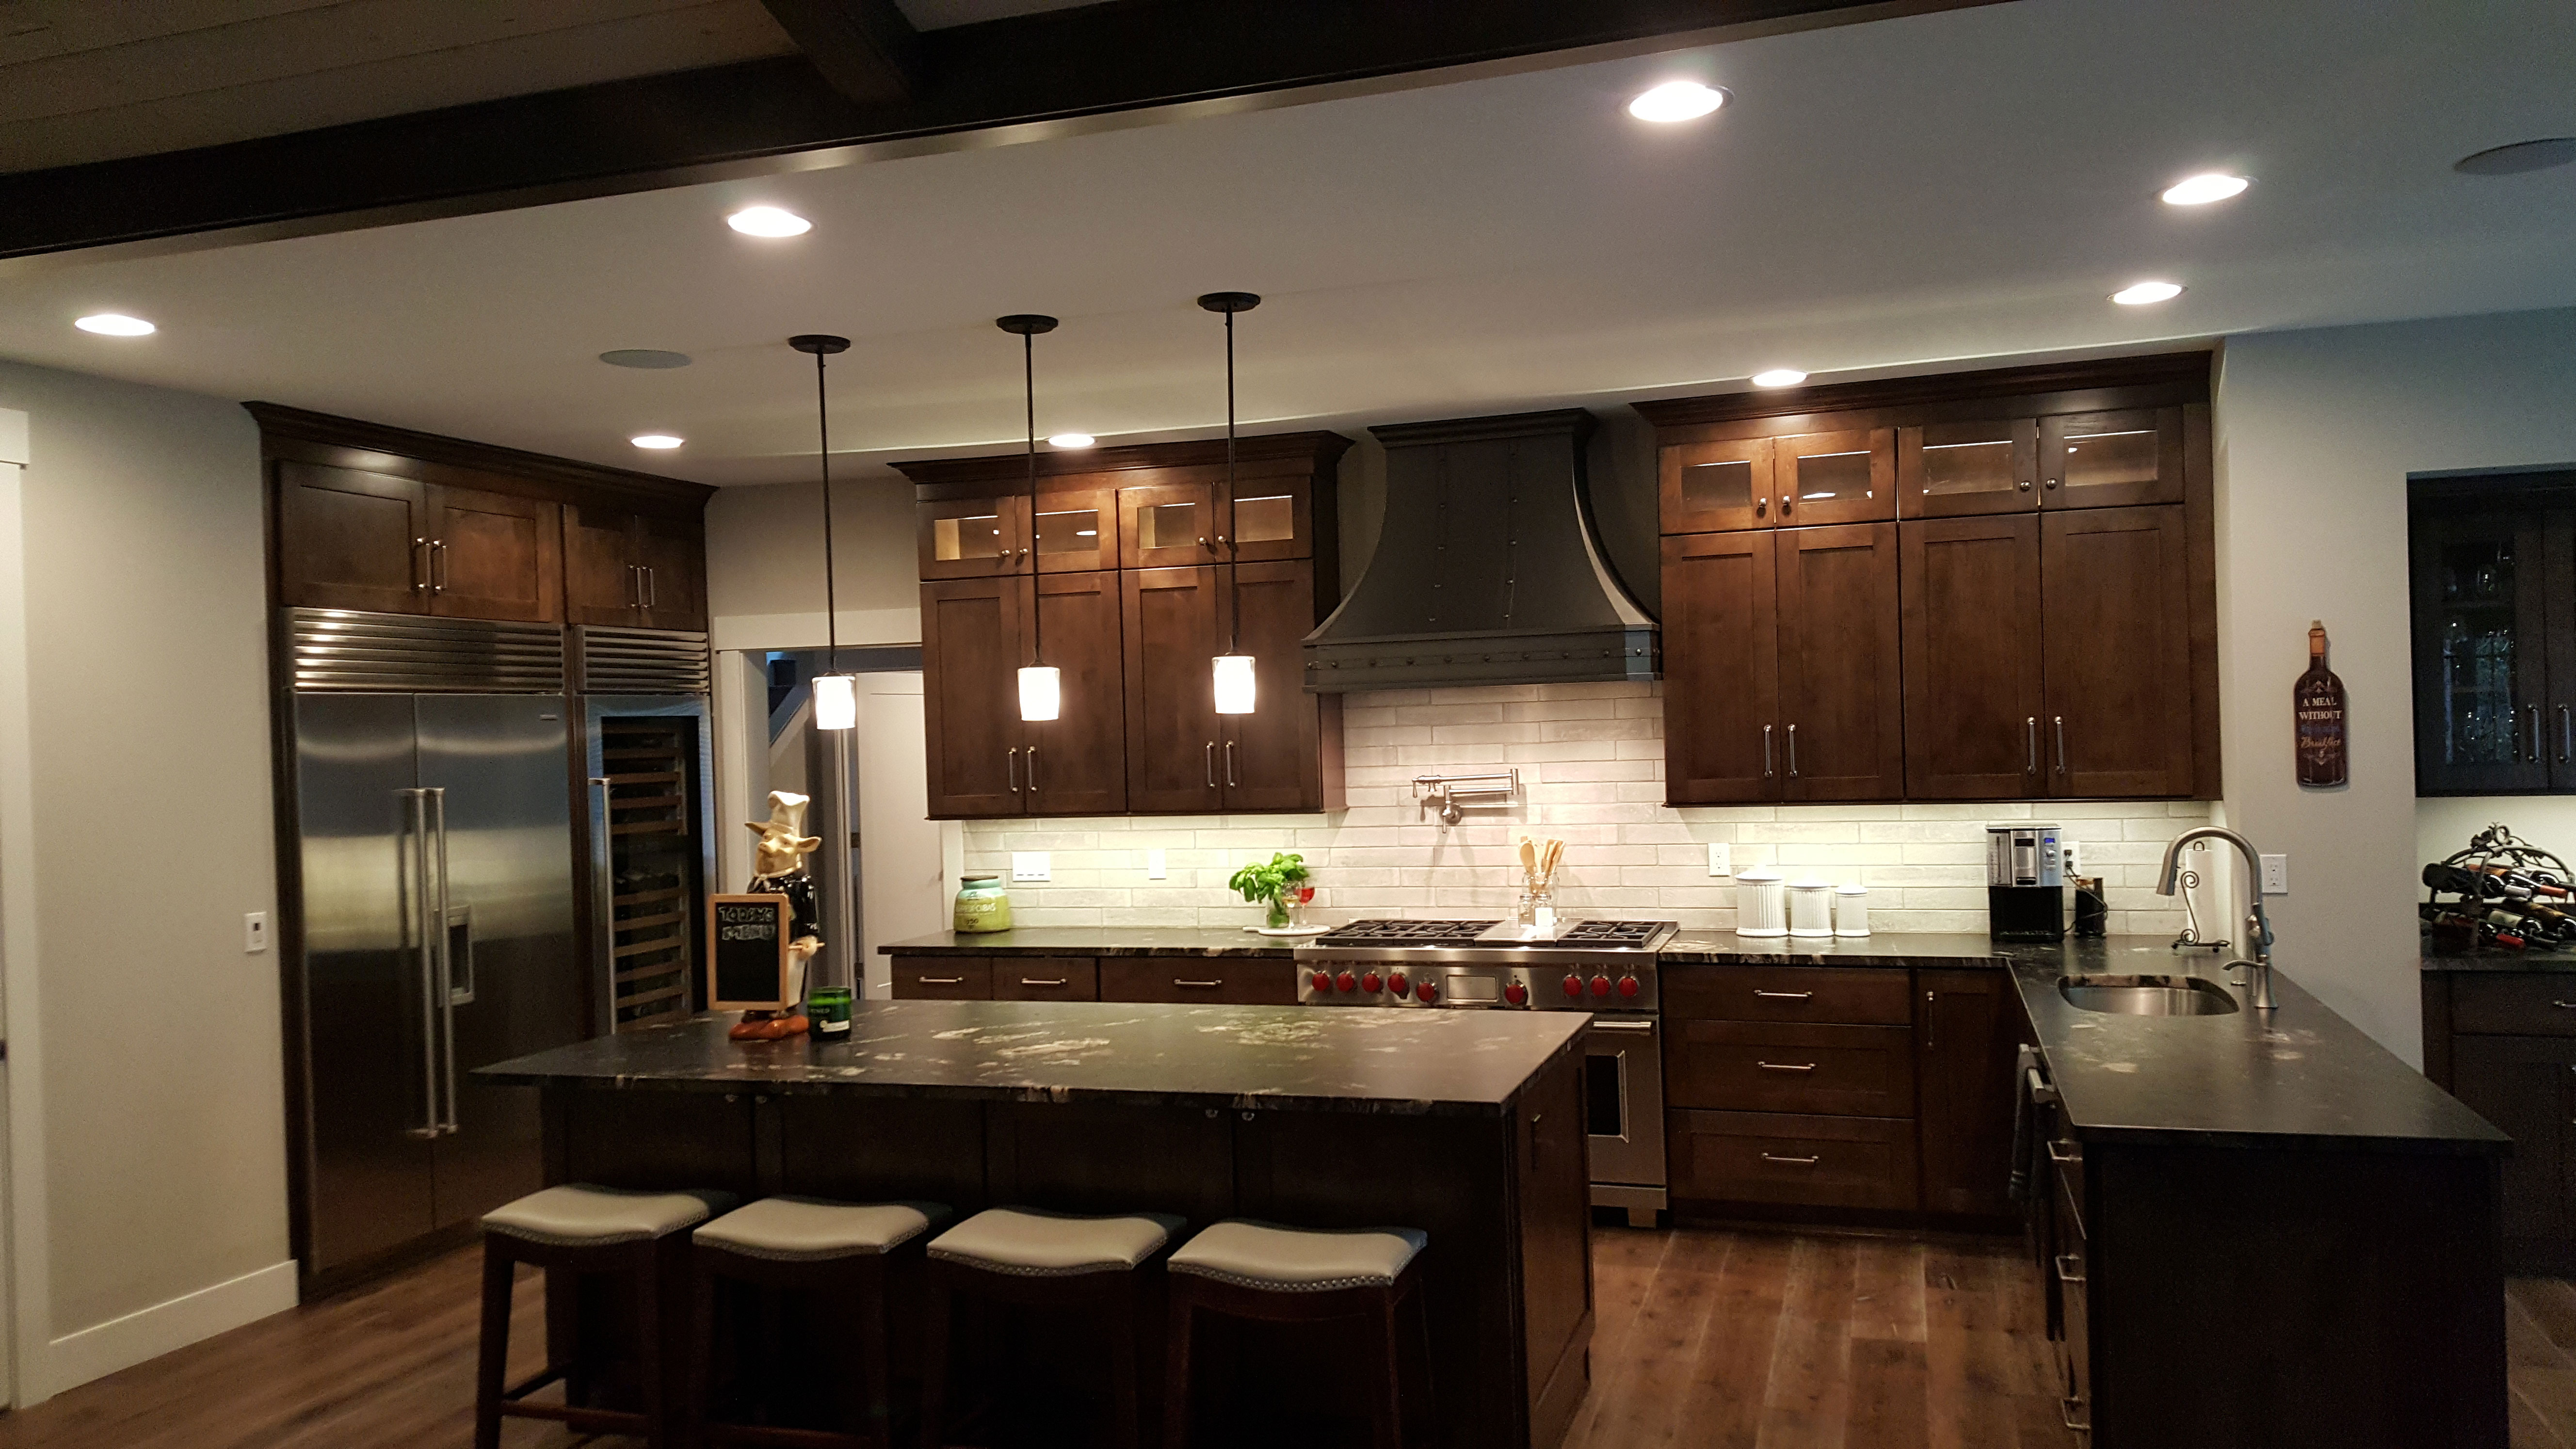 Copper range hood with dark finish in a kitchen with chrome appliances. World CopperSmith